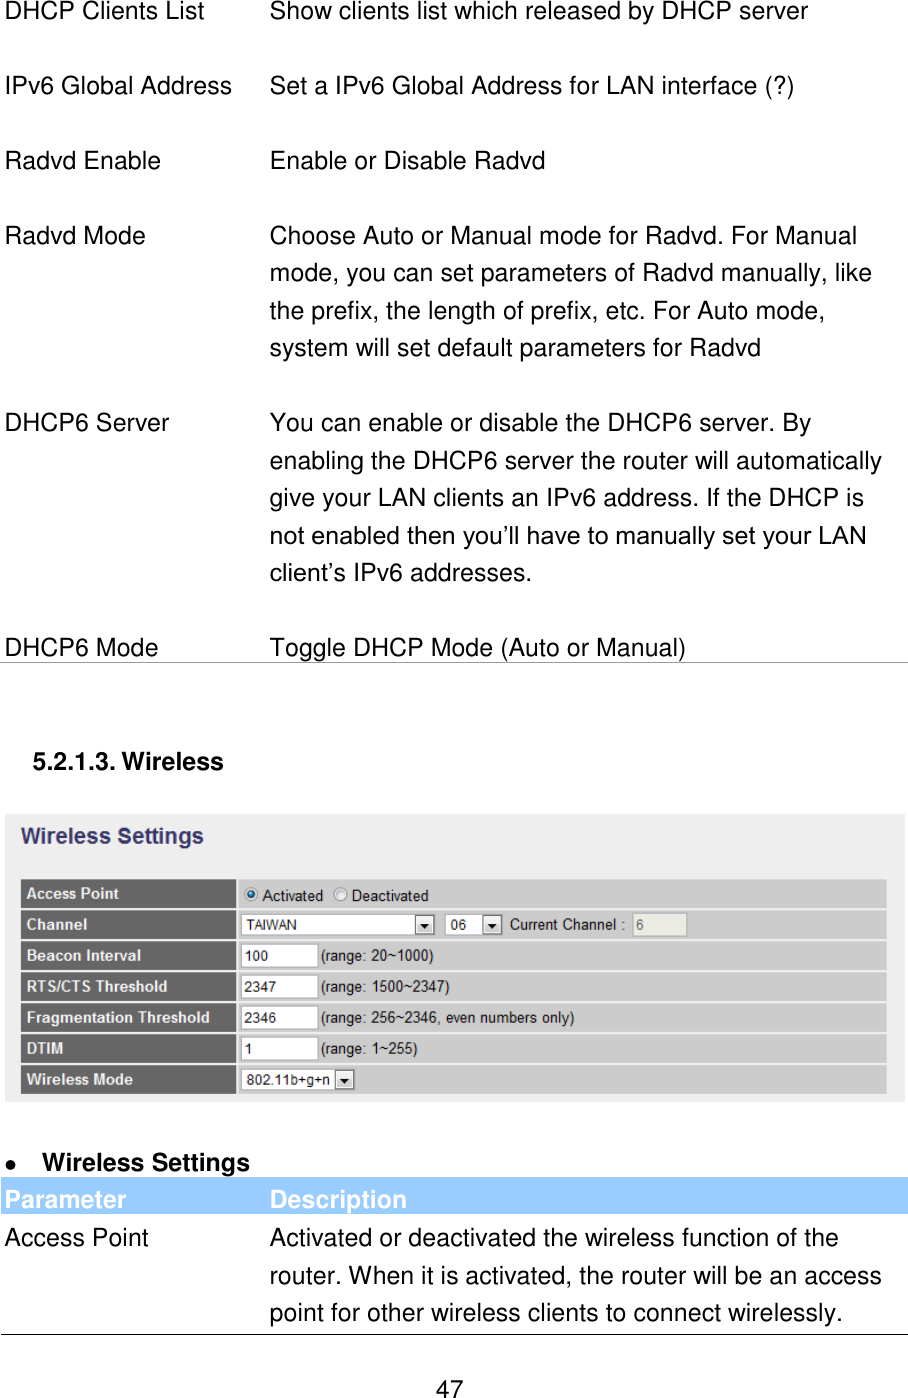   47 DHCP Clients List Show clients list which released by DHCP server   IPv6 Global Address Set a IPv6 Global Address for LAN interface (?)   Radvd Enable Enable or Disable Radvd   Radvd Mode Choose Auto or Manual mode for Radvd. For Manual mode, you can set parameters of Radvd manually, like the prefix, the length of prefix, etc. For Auto mode, system will set default parameters for Radvd   DHCP6 Server You can enable or disable the DHCP6 server. By enabling the DHCP6 server the router will automatically give your LAN clients an IPv6 address. If the DHCP is not enabled then you’ll have to manually set your LAN client’s IPv6 addresses.   DHCP6 Mode Toggle DHCP Mode (Auto or Manual)   5.2.1.3. Wireless     Wireless Settings Parameter Description Access Point Activated or deactivated the wireless function of the router. When it is activated, the router will be an access point for other wireless clients to connect wirelessly.  